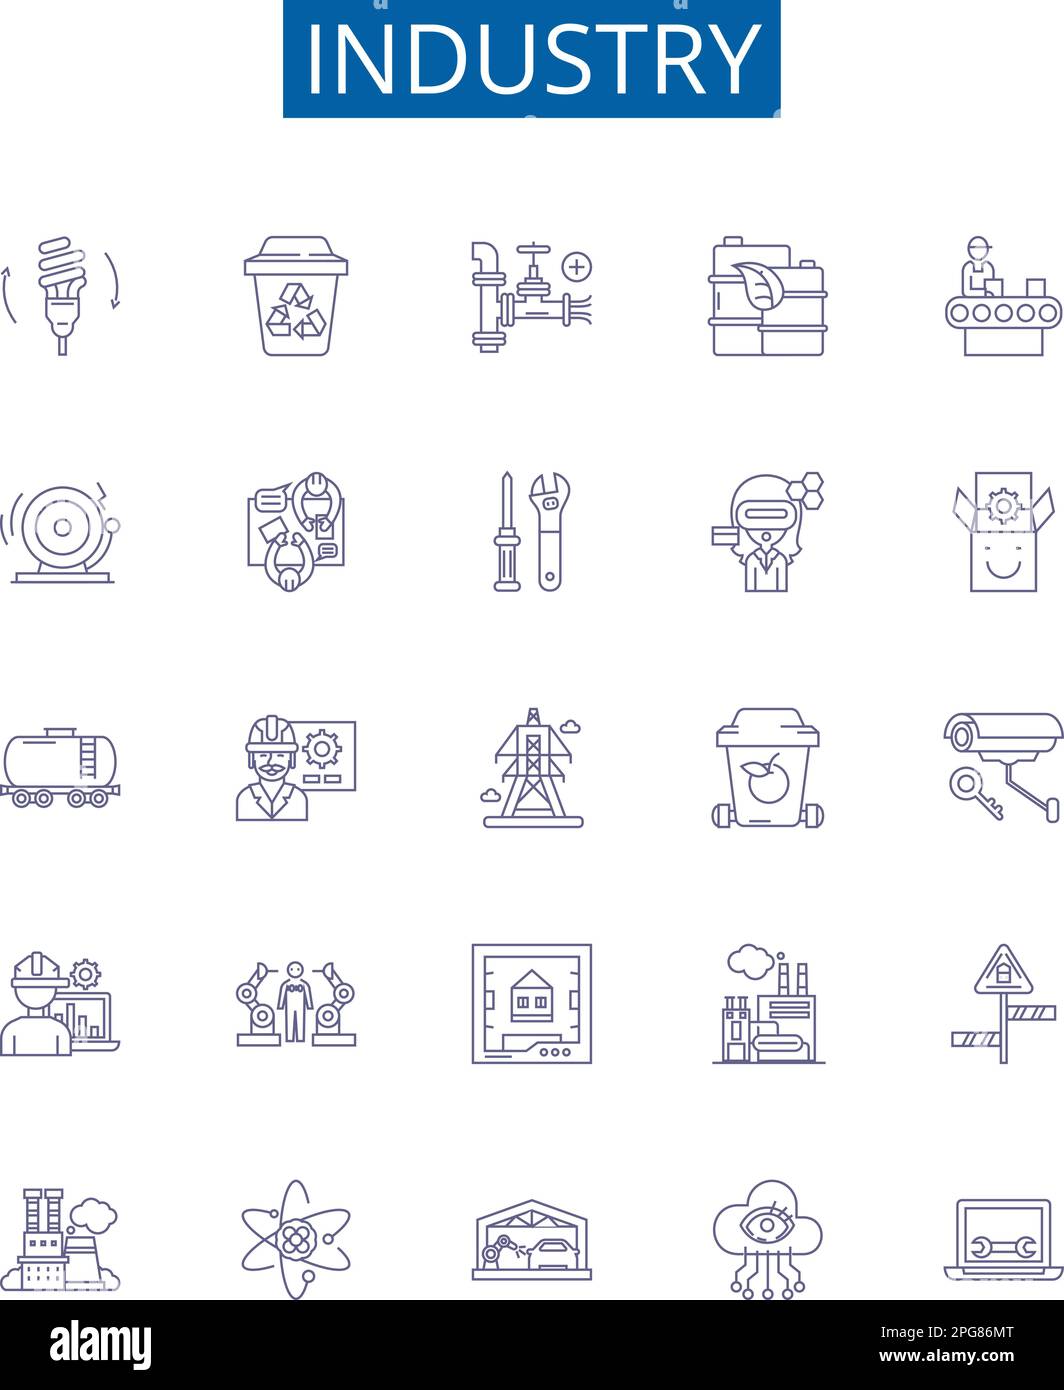 Industry line icons signs set. Design collection of Manufacturing, Technology, Production, Business, Equipment, Automotive, Retail, Services outline Stock Vector